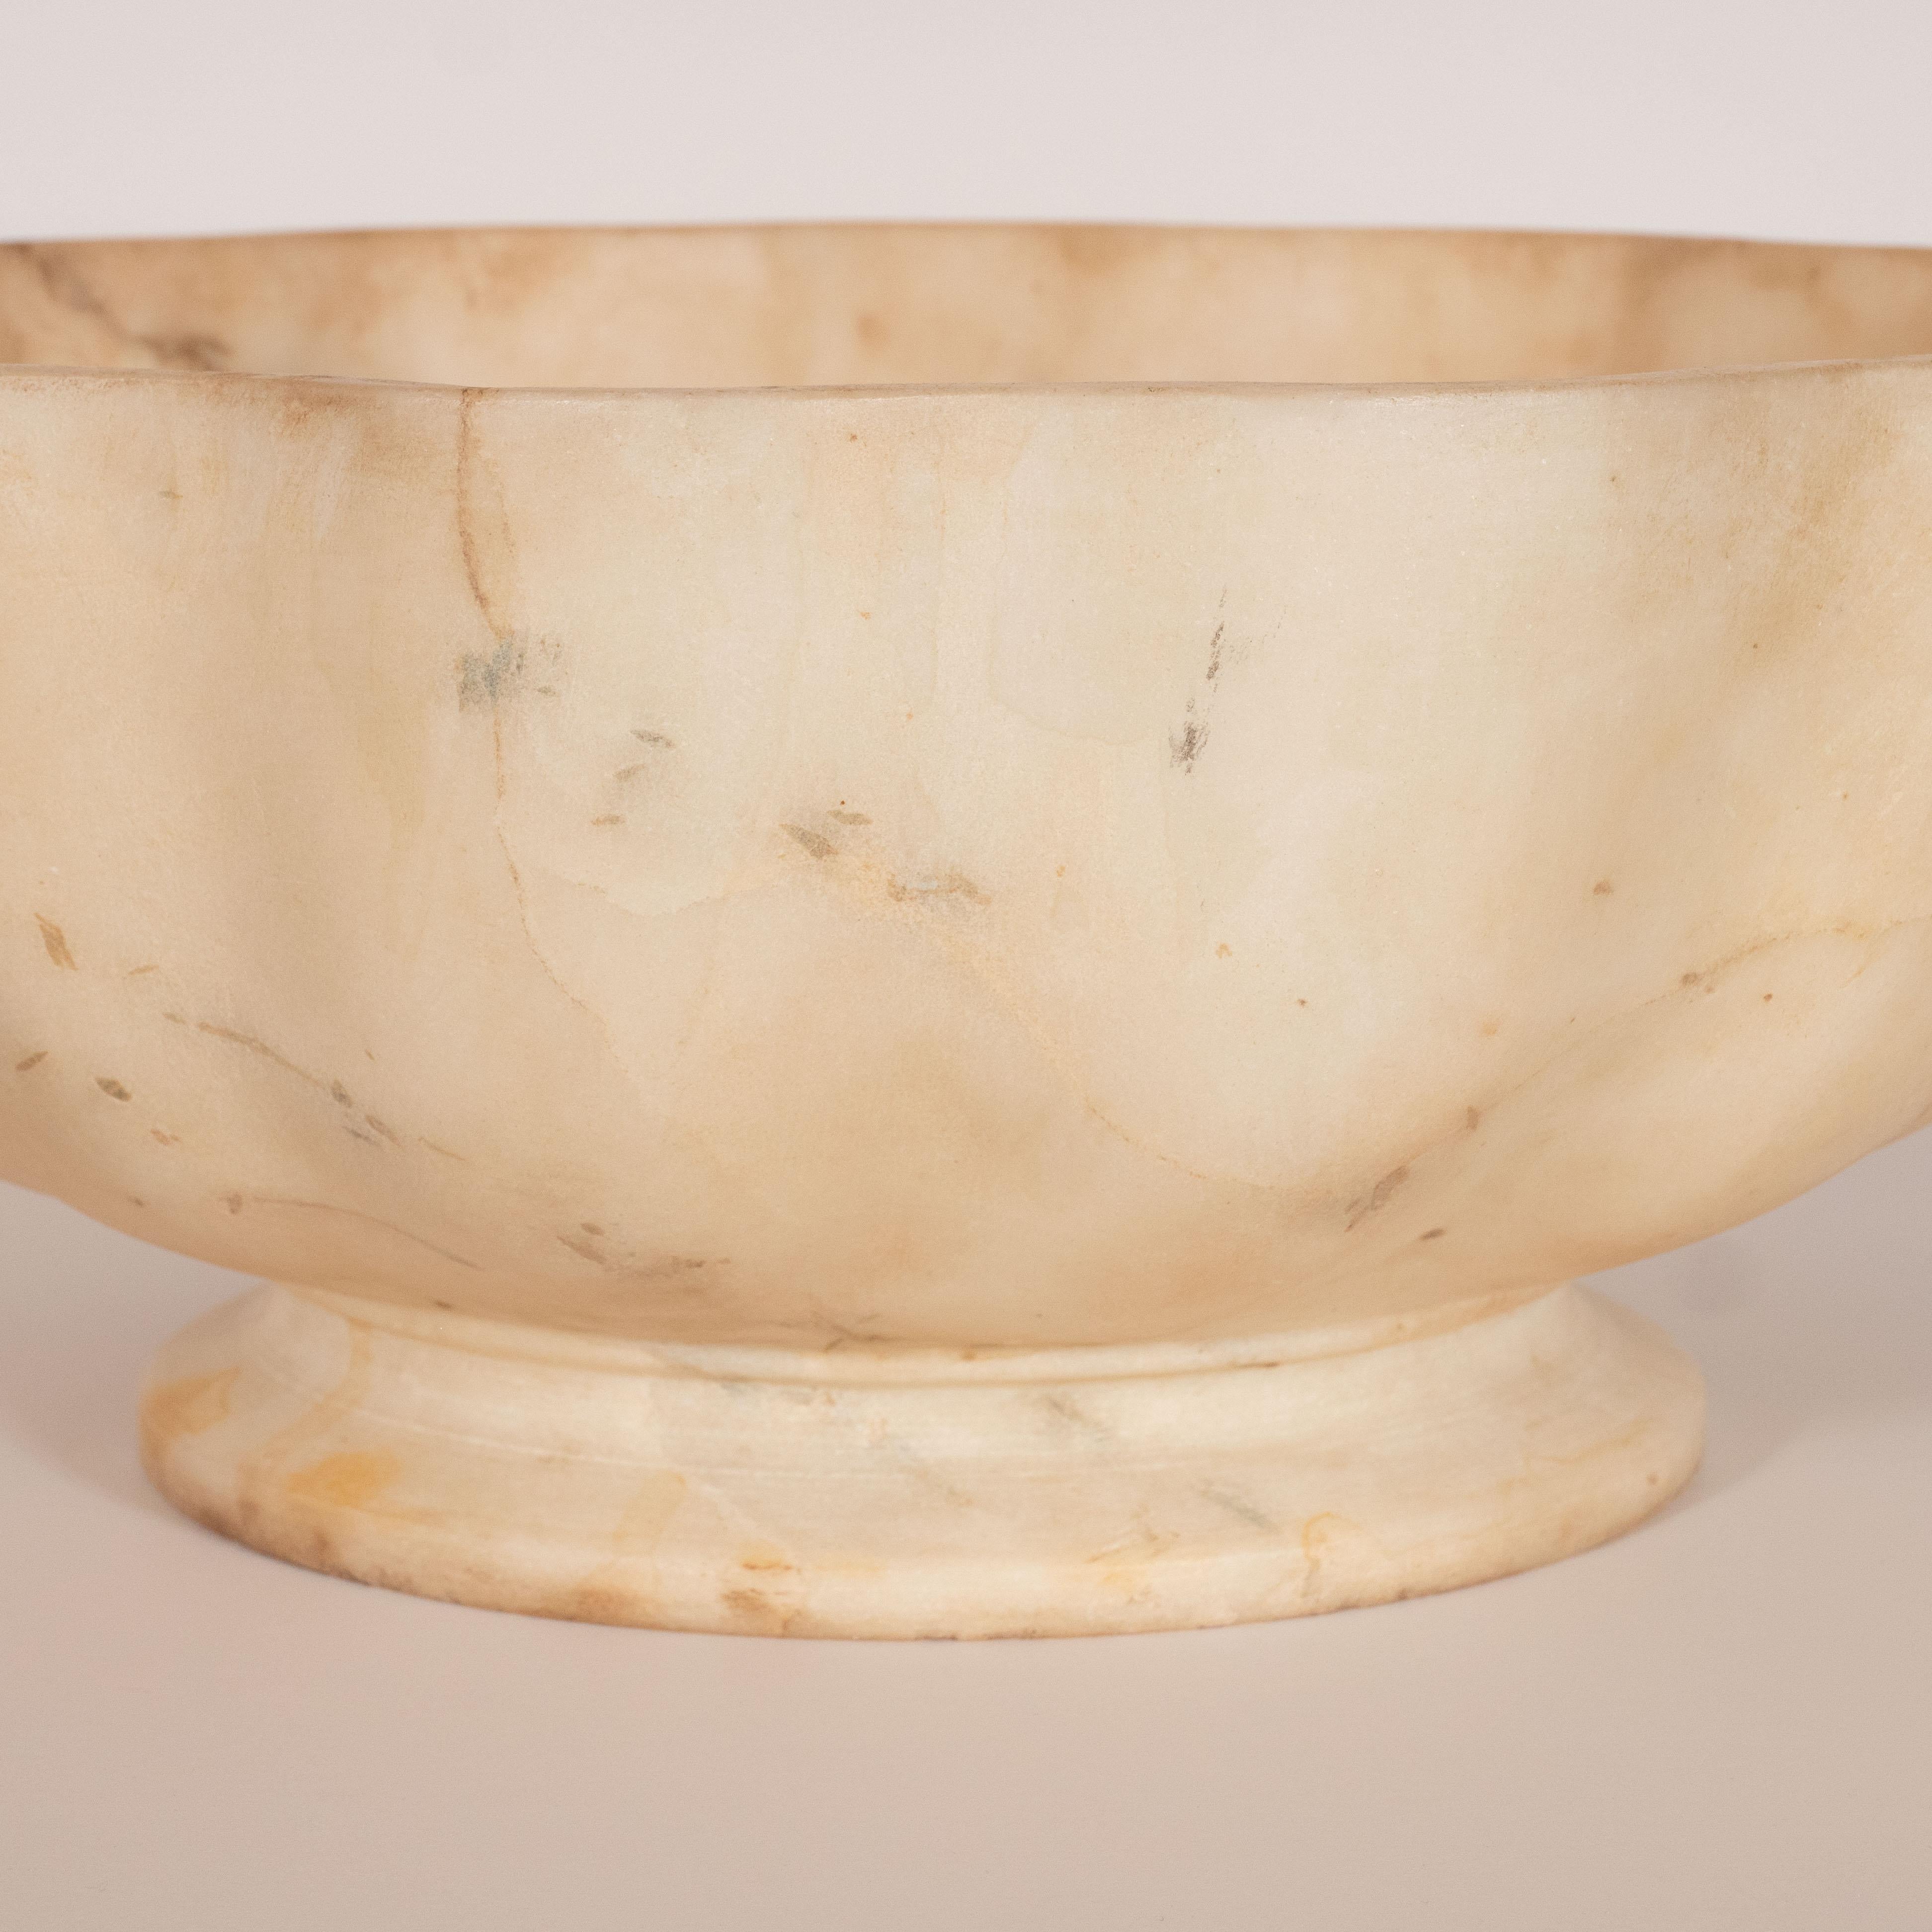 This refined marble bowl was hand-carved in Italy. It features a circular base and scalloped sides in exotic marble with variegated muted tones of oatmeal, cocoa and cream. With its austere form and beautiful natural stone grain, this piece would be